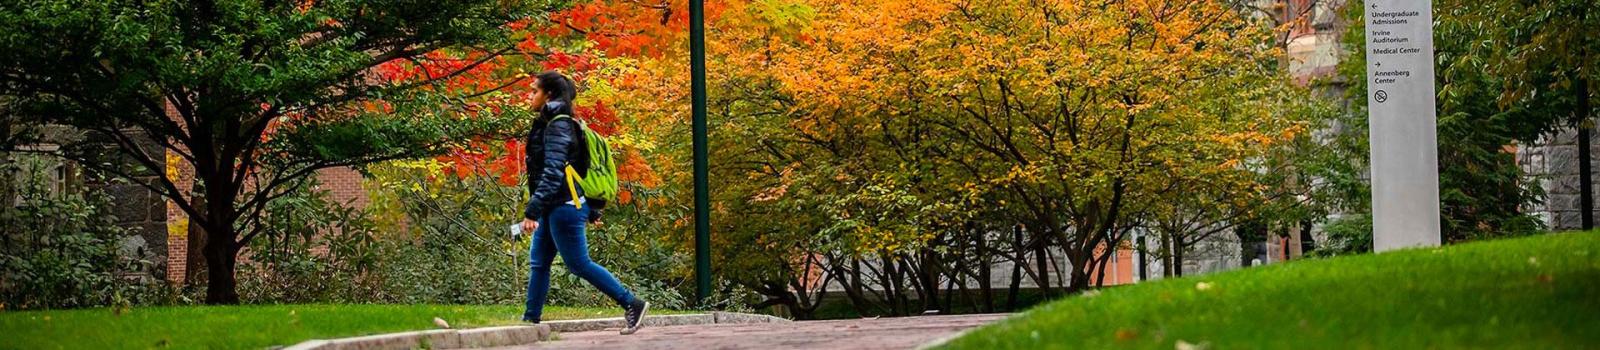 Student walking though campus in the fall